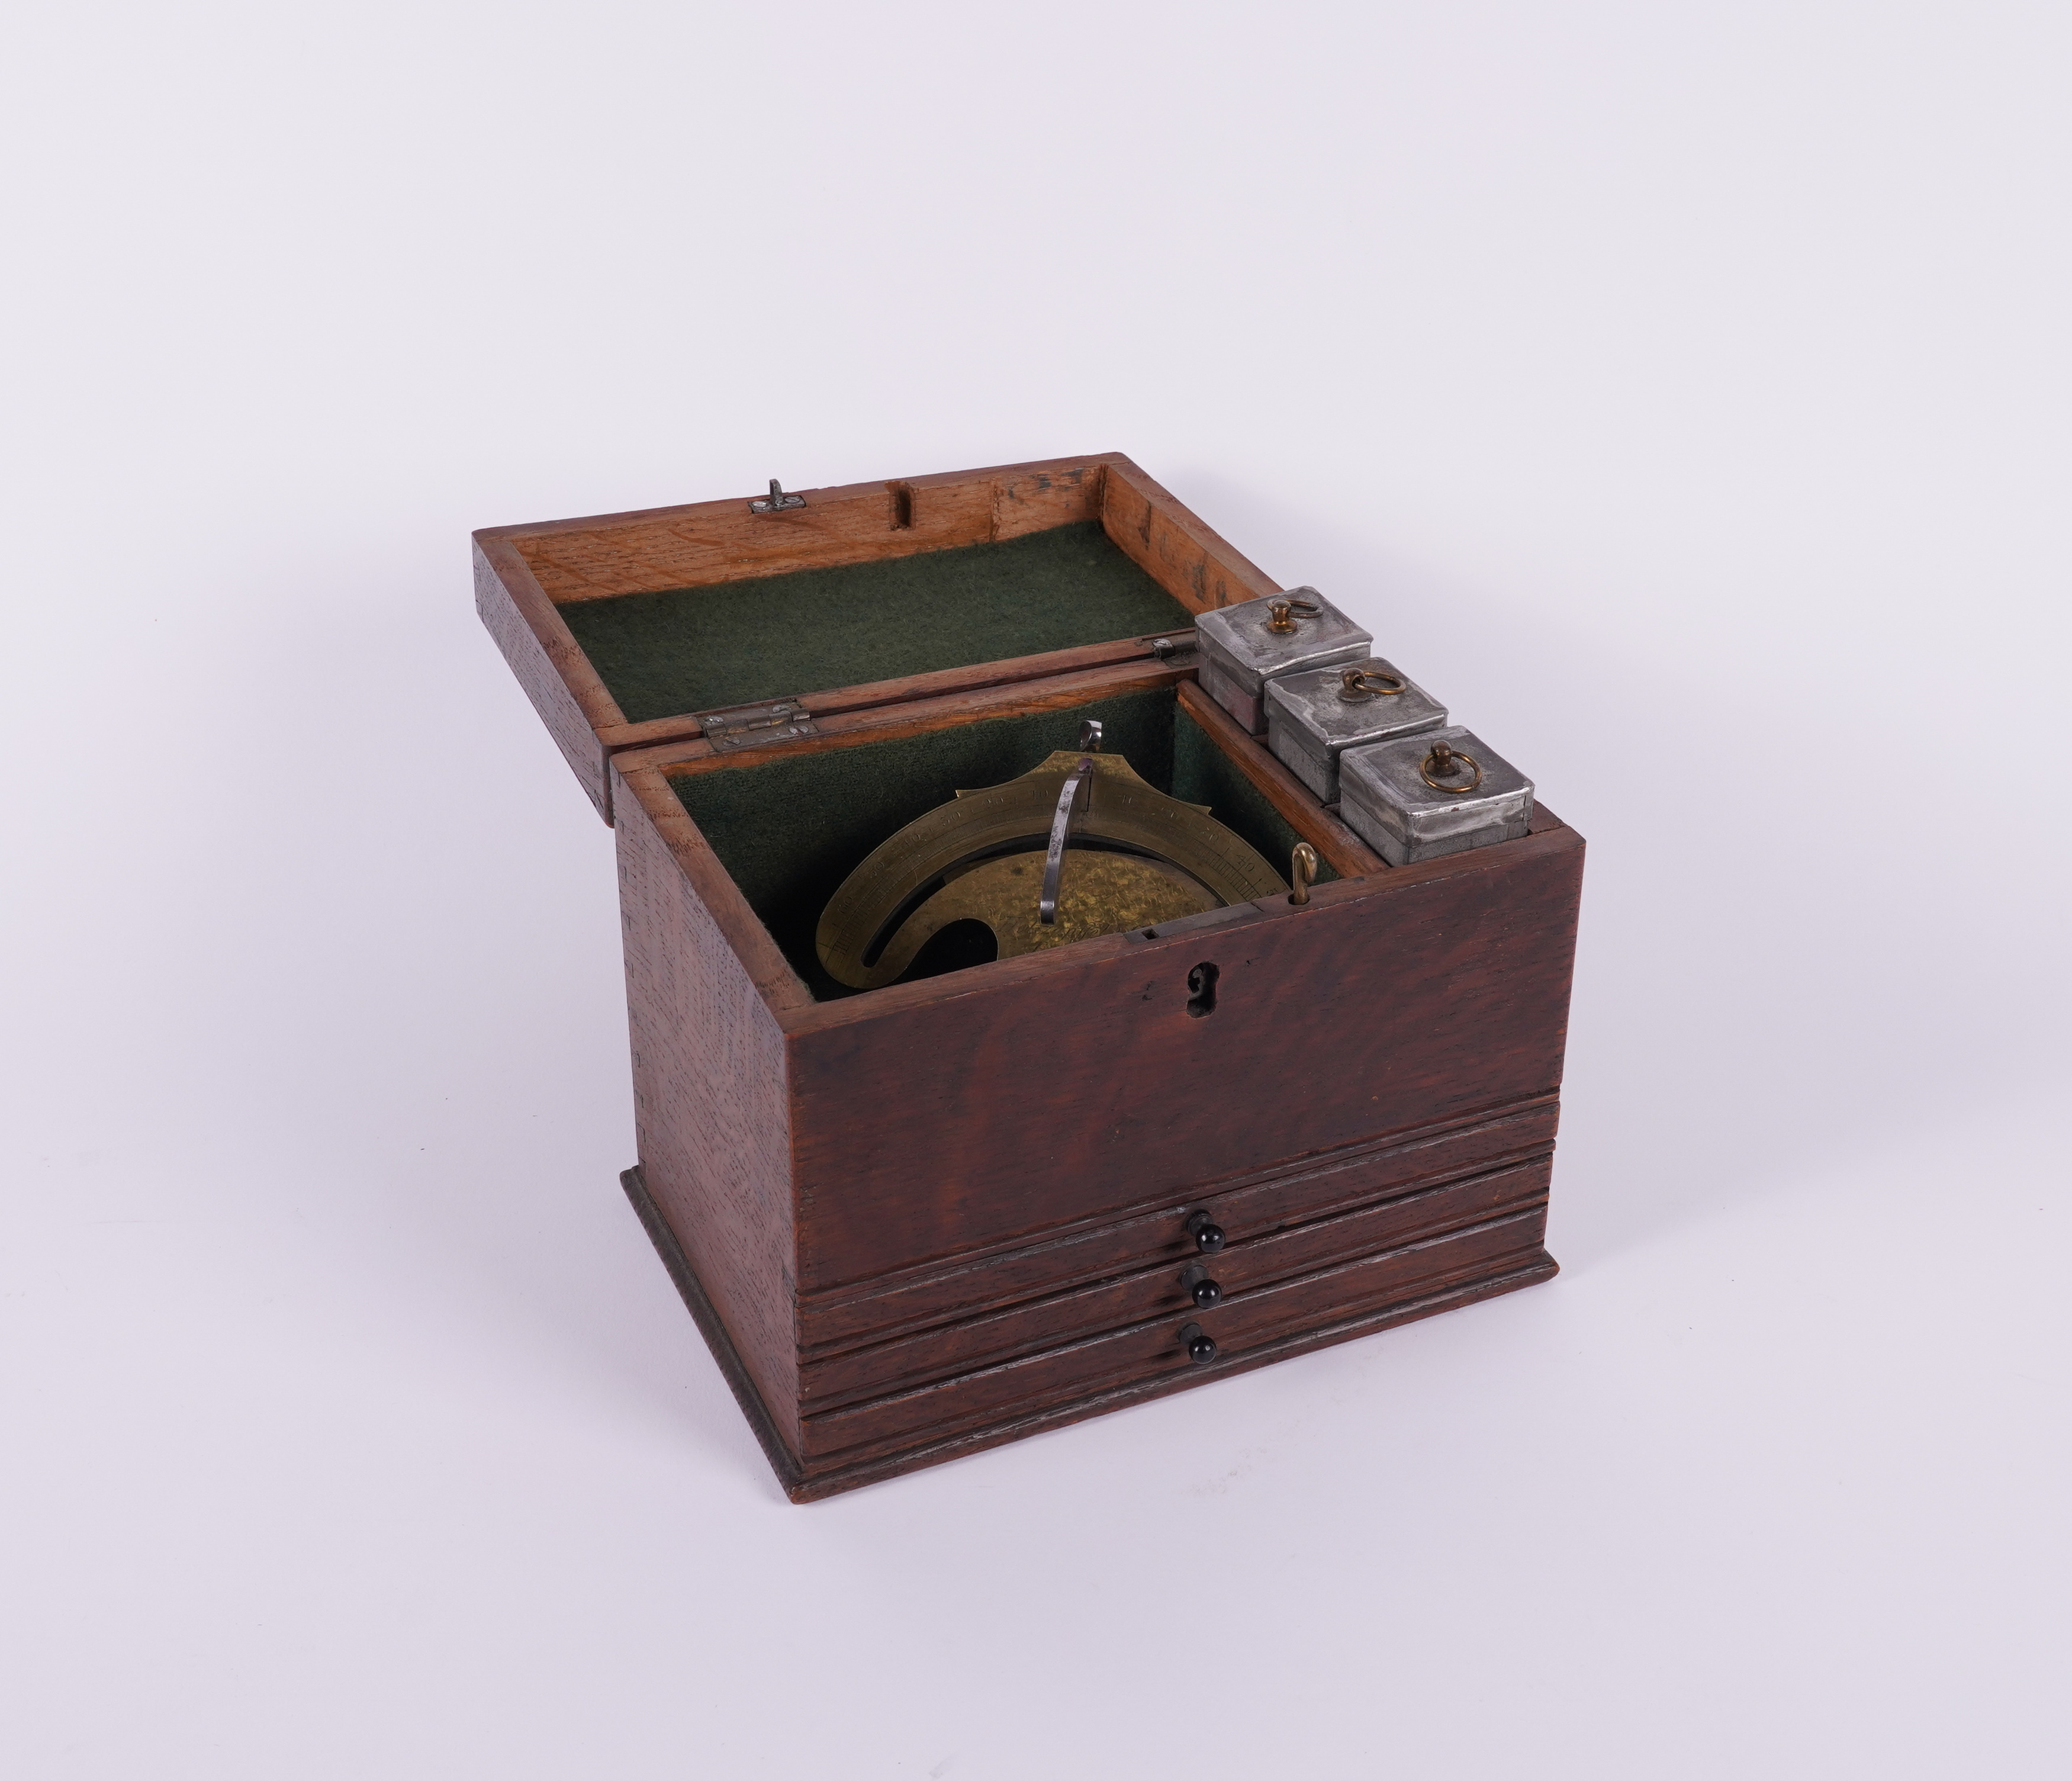 HOLTZAPFFEL & CO, LONDON: AN ANTIQUE GONIOSTAT IN MAHOGANY CASE - Image 3 of 7